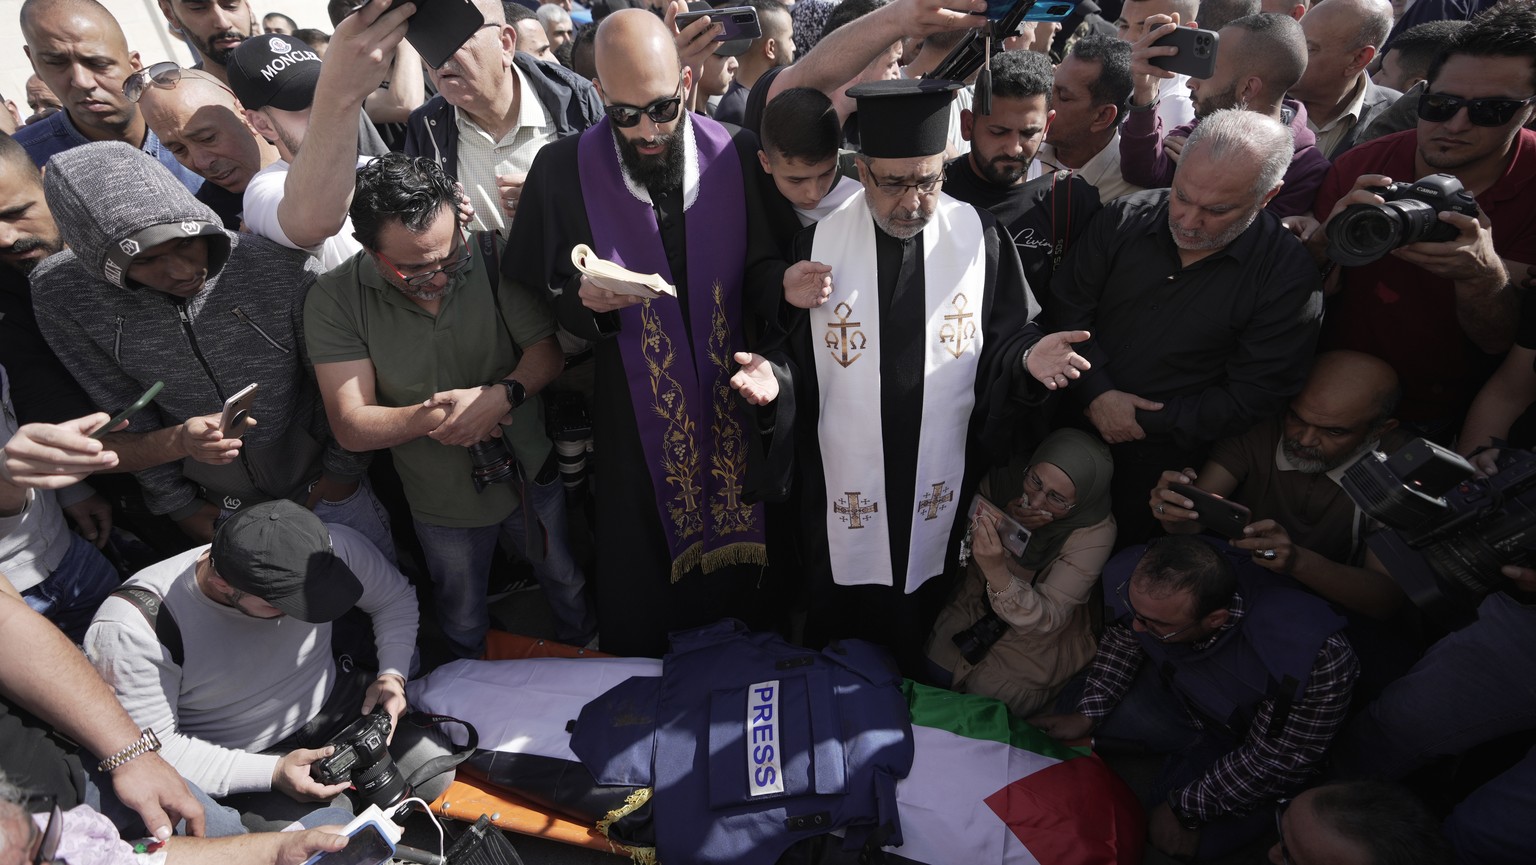 Journalists surround the body of Shireen Abu Akleh, a journalist for Al Jazeera network, into the morgue inside the Hospital in the West Bank town of Jenin, Wednesday, May 11, 2022. The well-known Pal ...